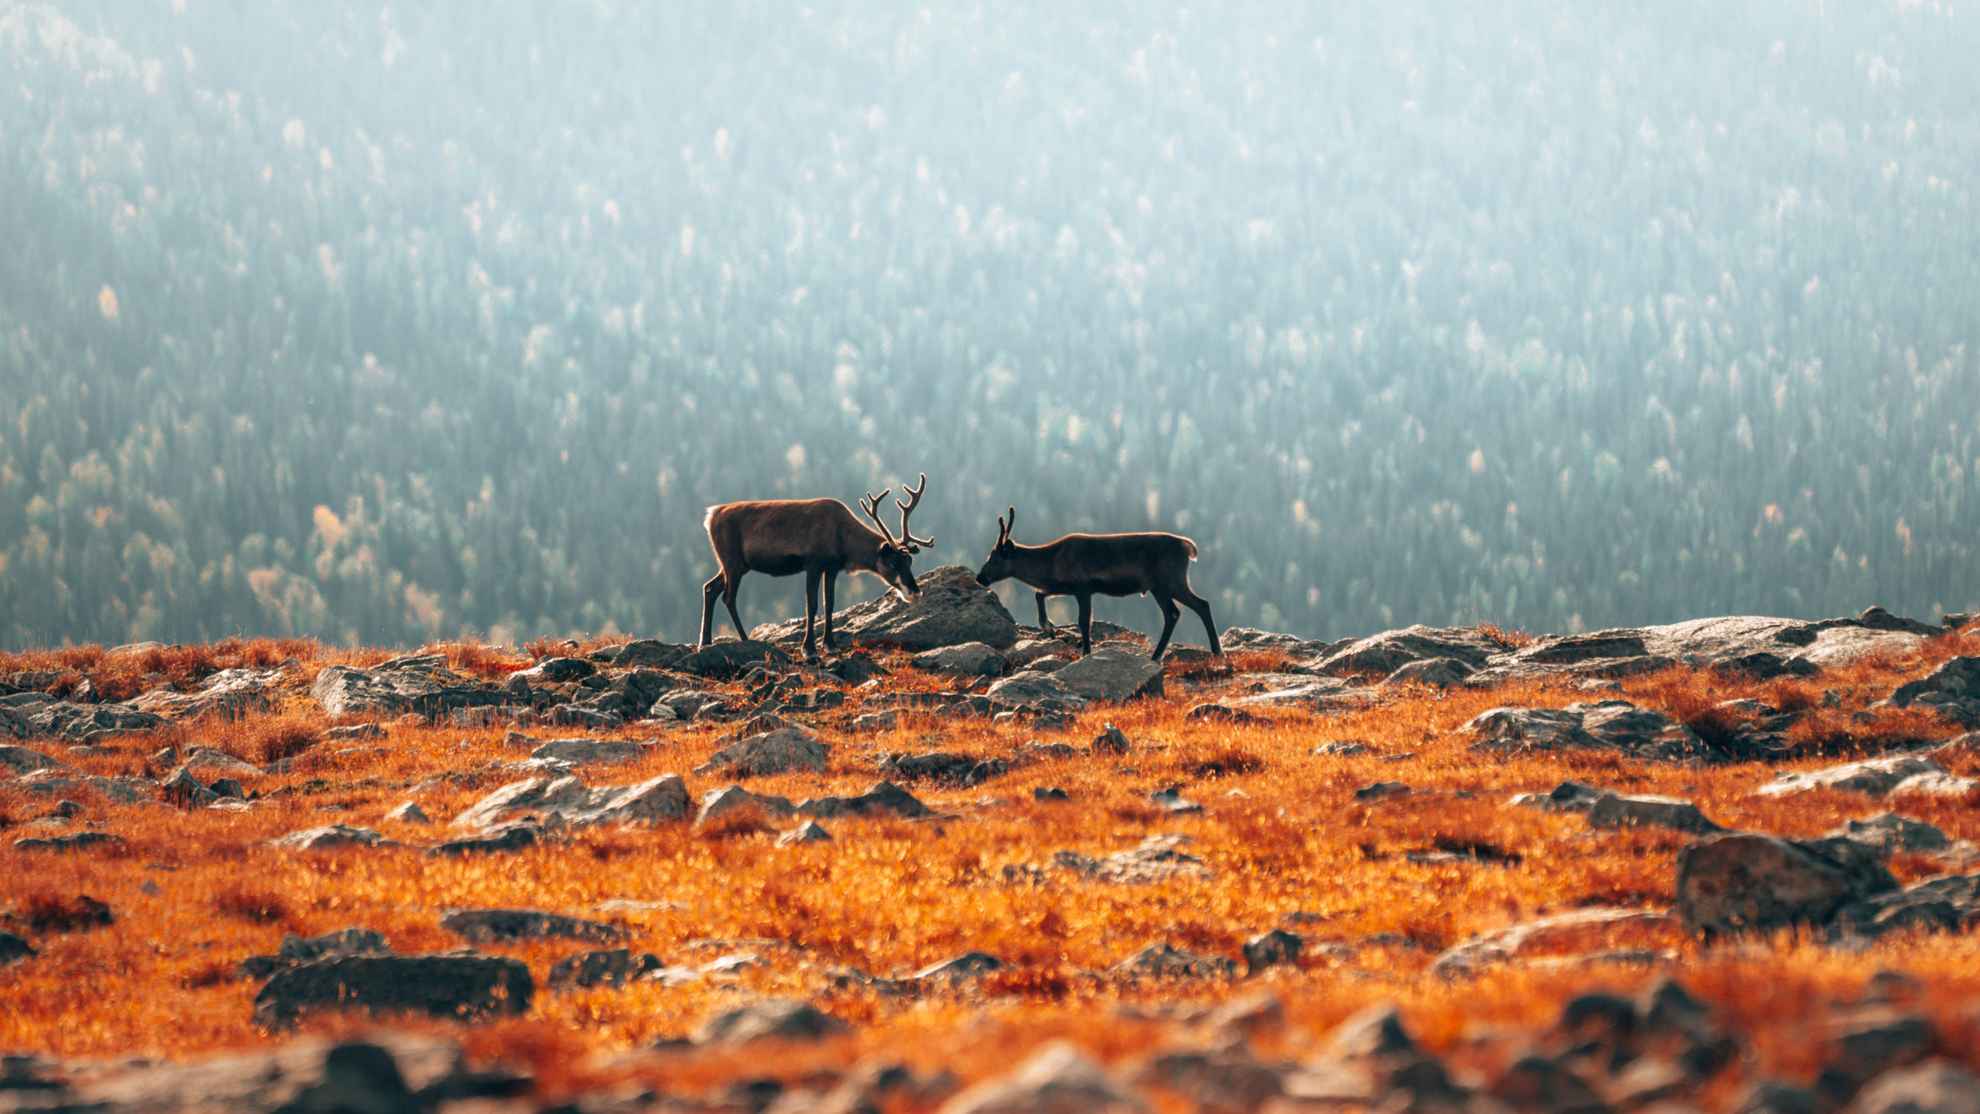 Two reindeer stand in nature.